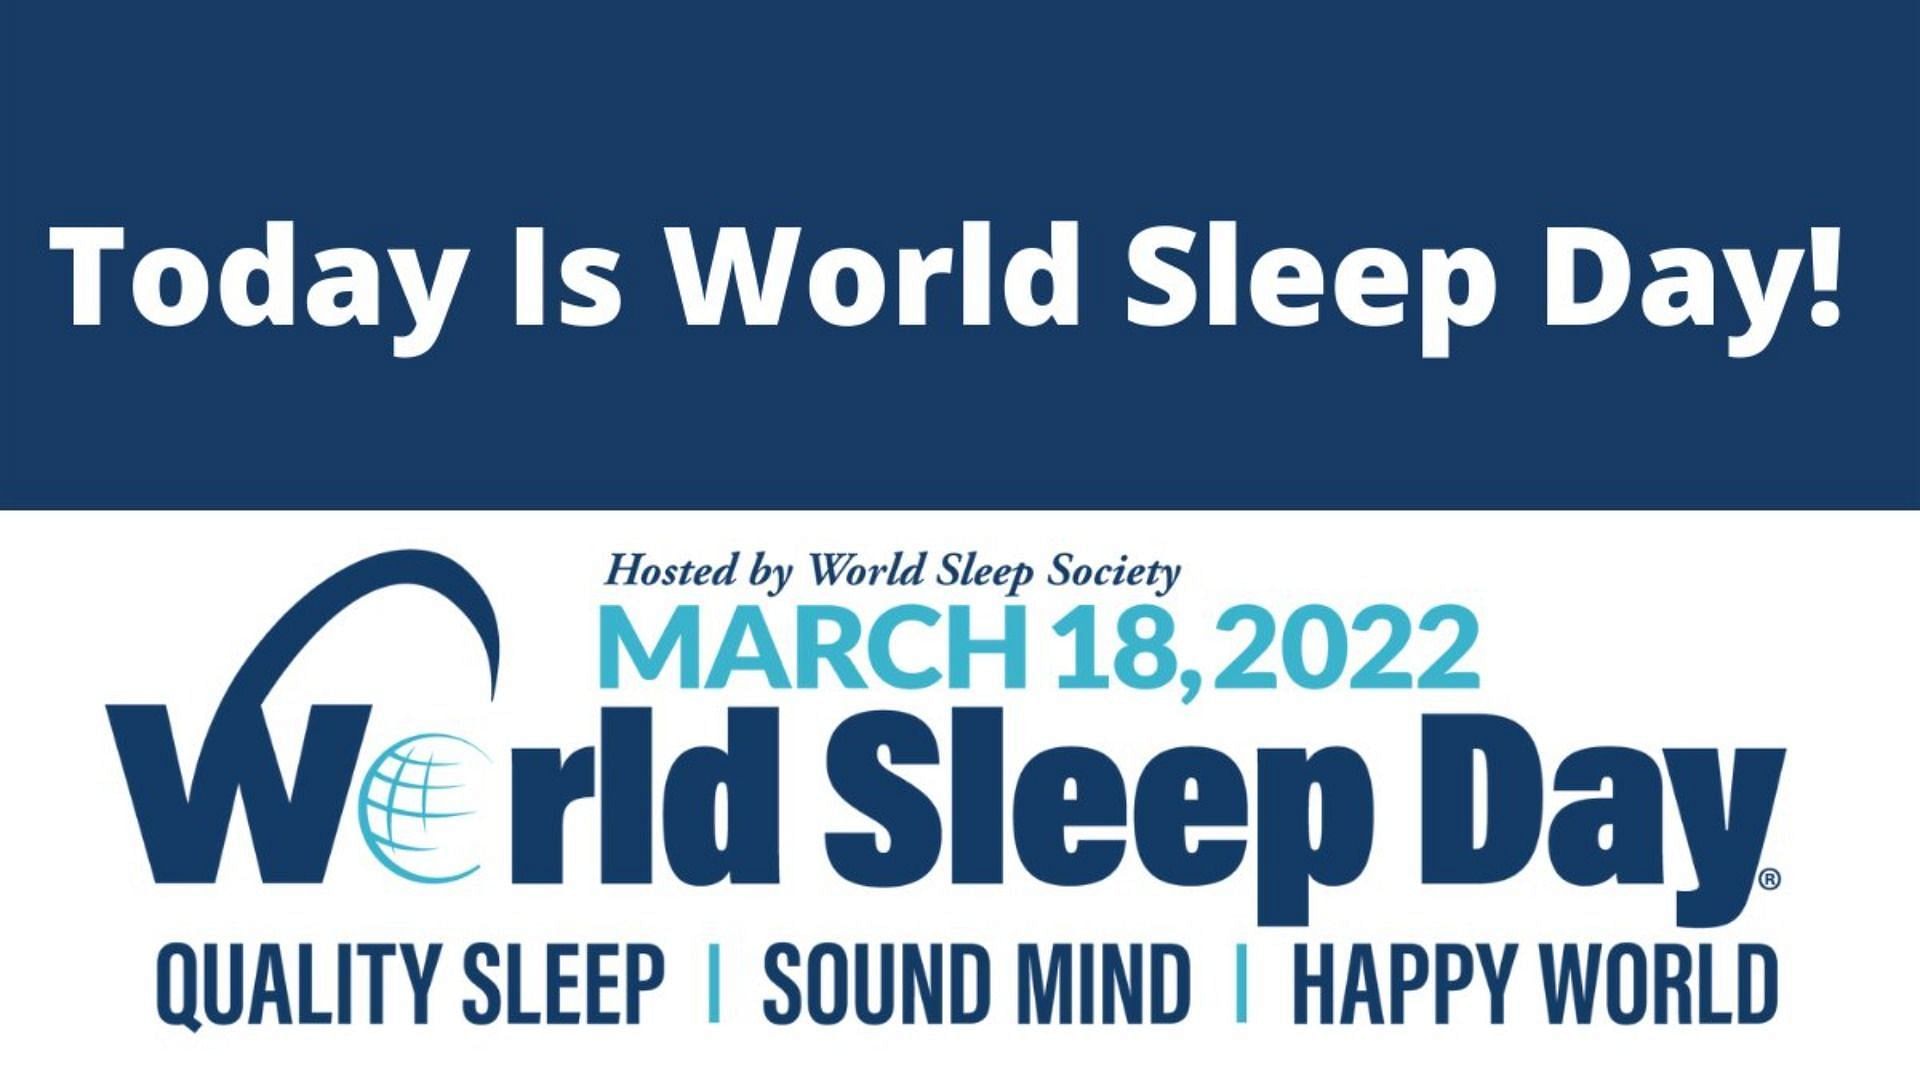 World Sleep Day, celebrated on the Friday before Spring Equinox, falls on March 18 for 2022 (Image via World Sleep Society)